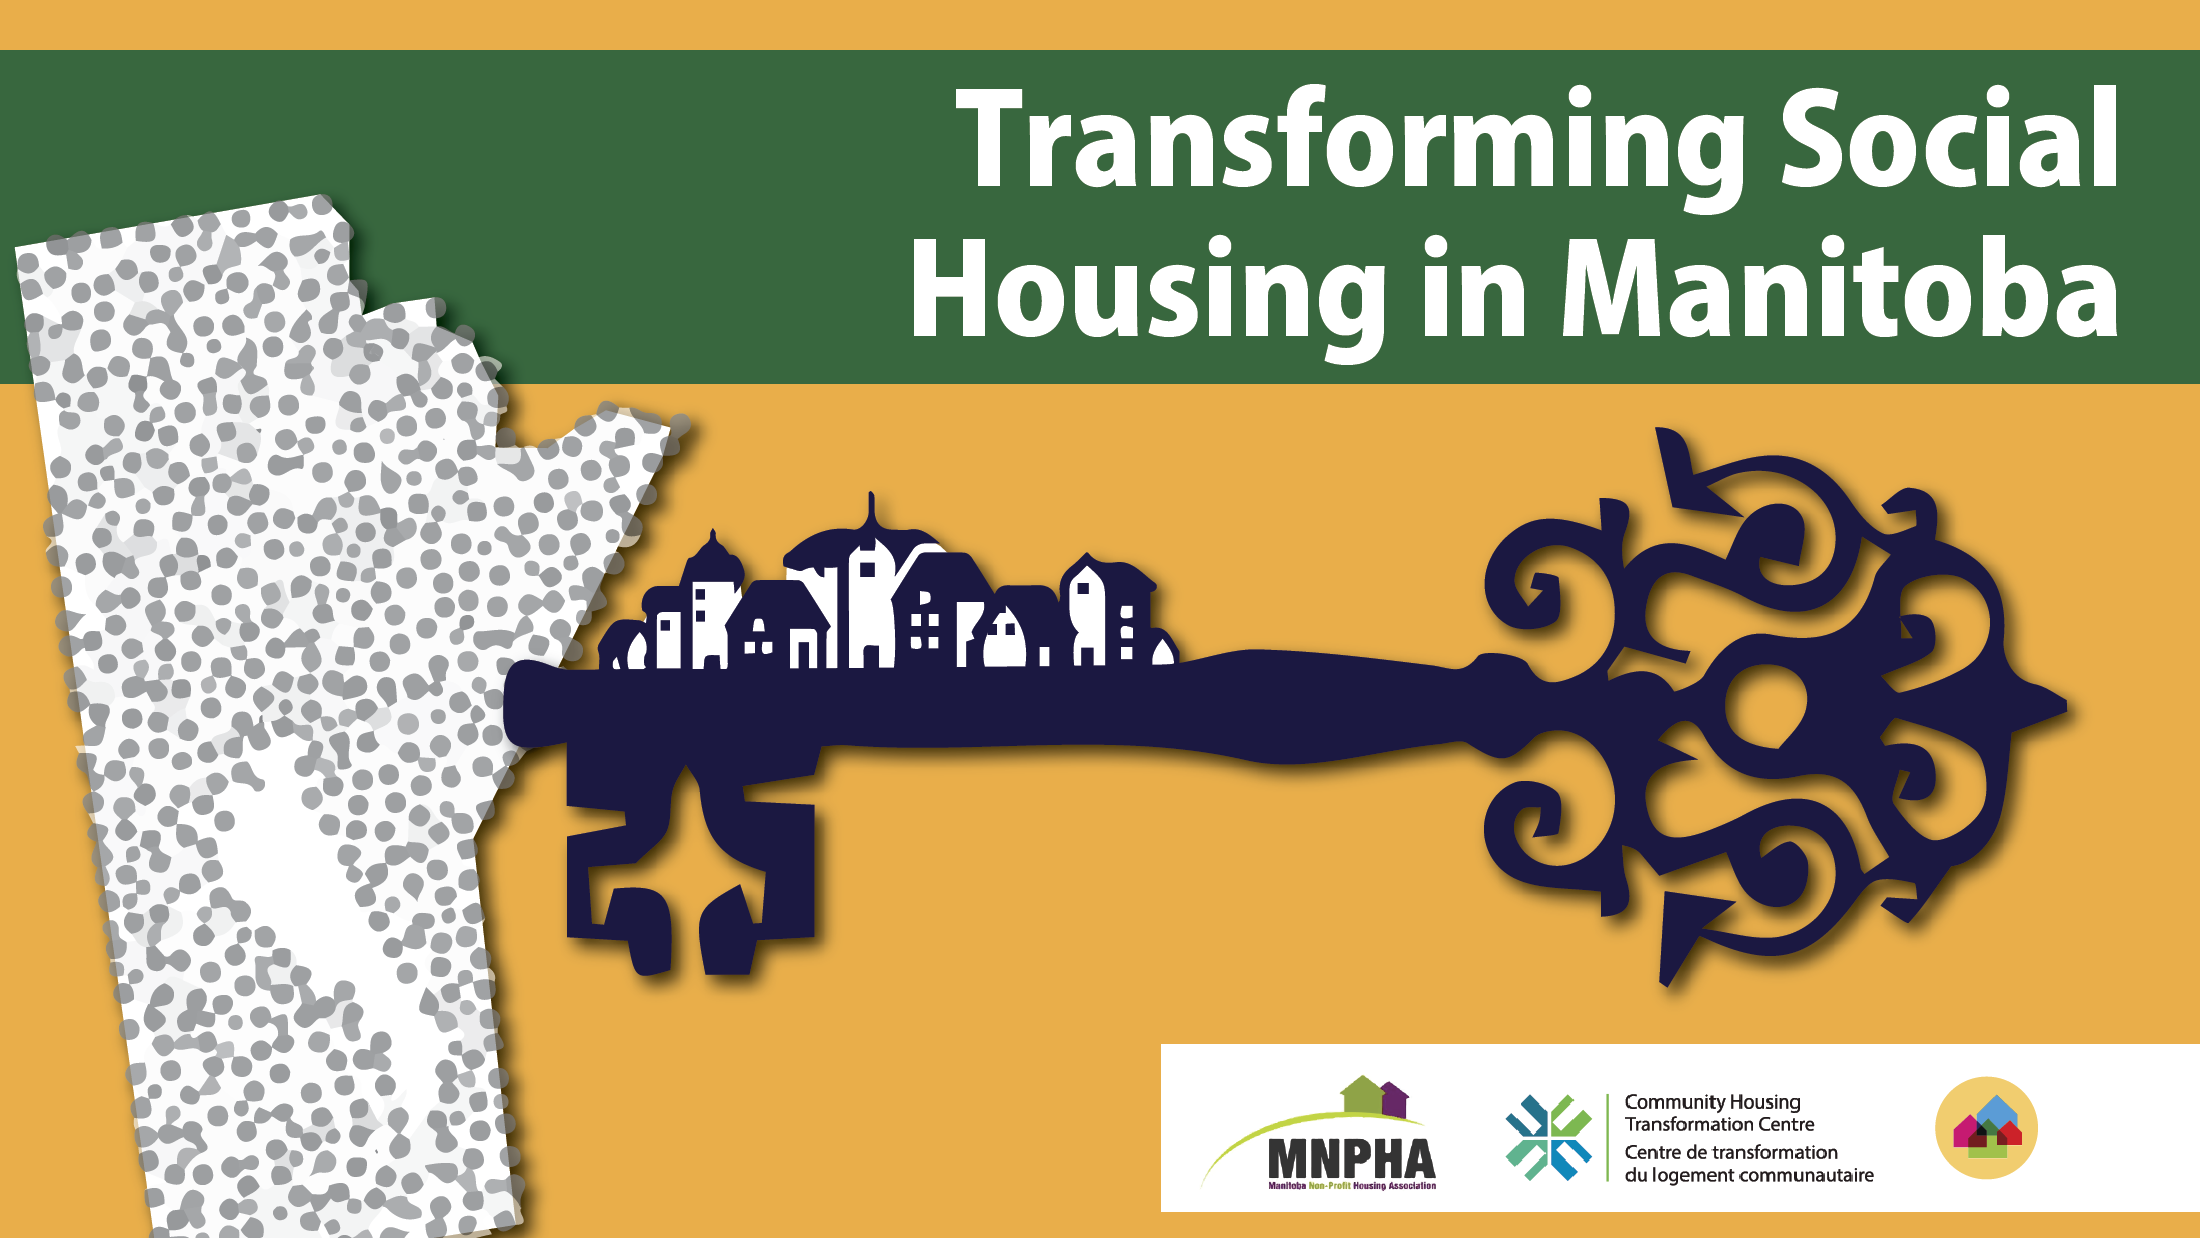 Transforming Social Housing in Manitoba: Business Planning and Community Control